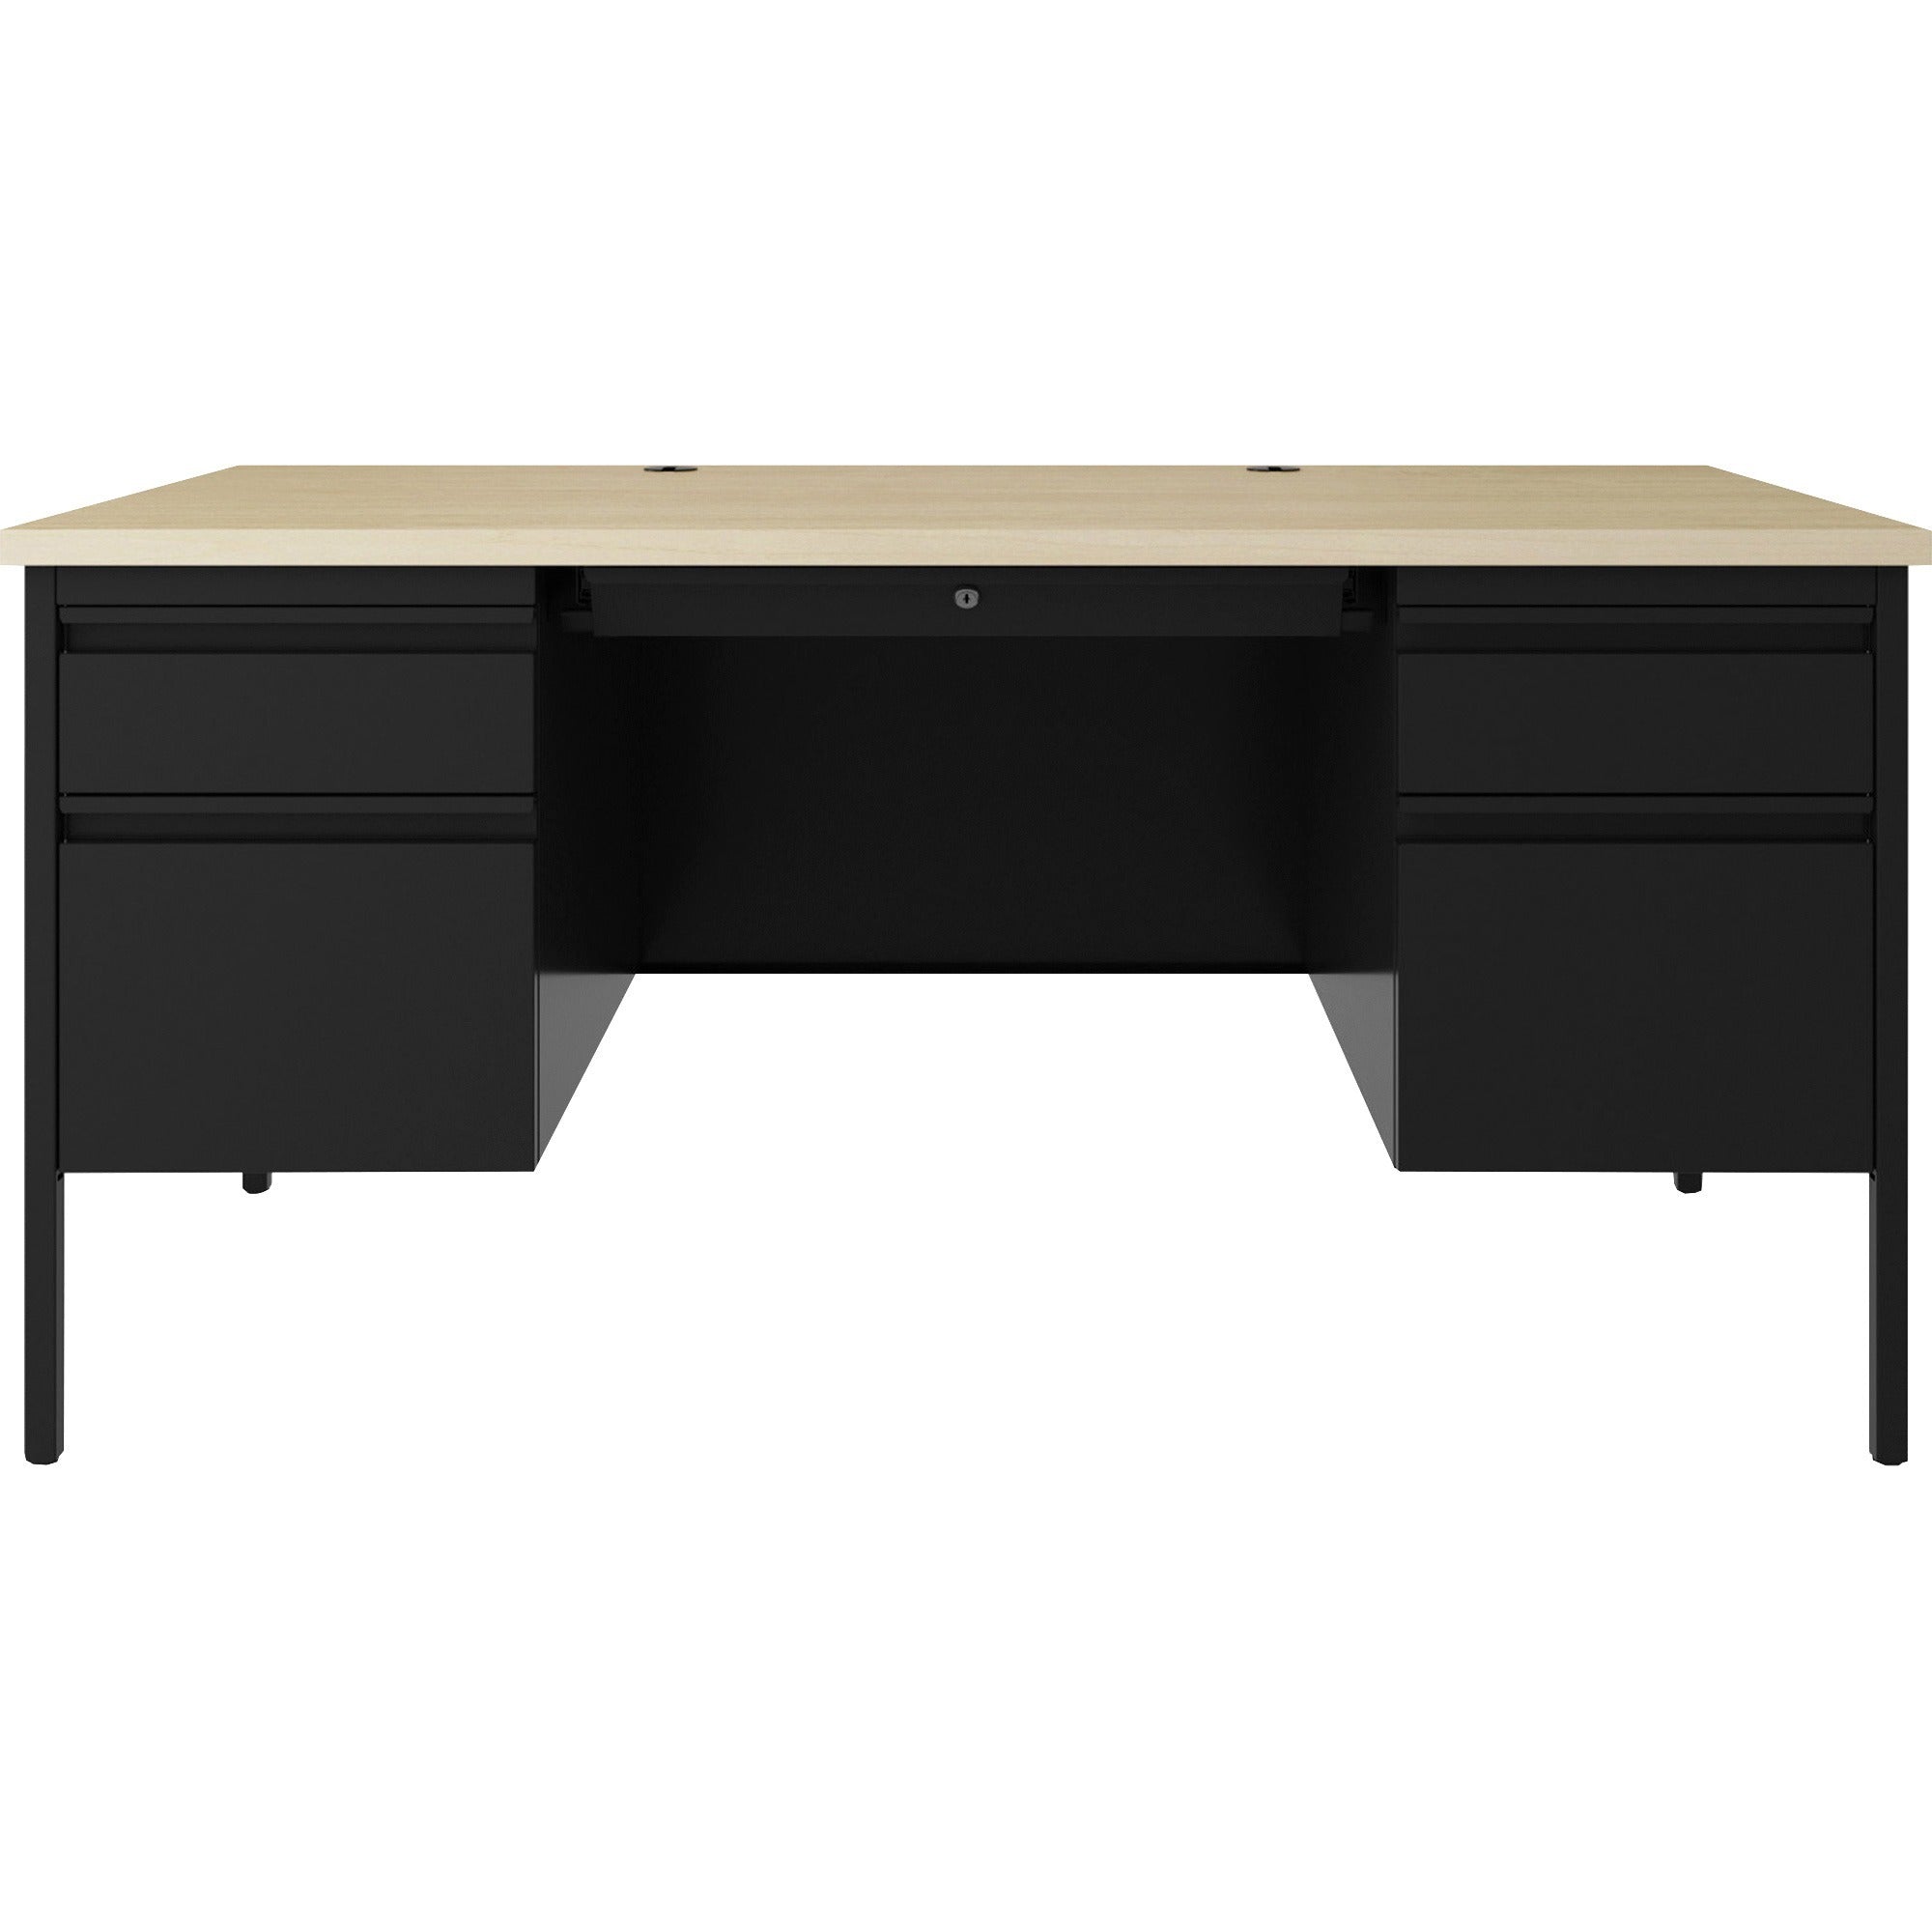 lorell-fortress-series-double-pedestal-desk-60-x-29530--11-top-08-modesty-panel-file-drawers-double-pedestal-square-edge-material-steel-finish-black_llr60930 - 2